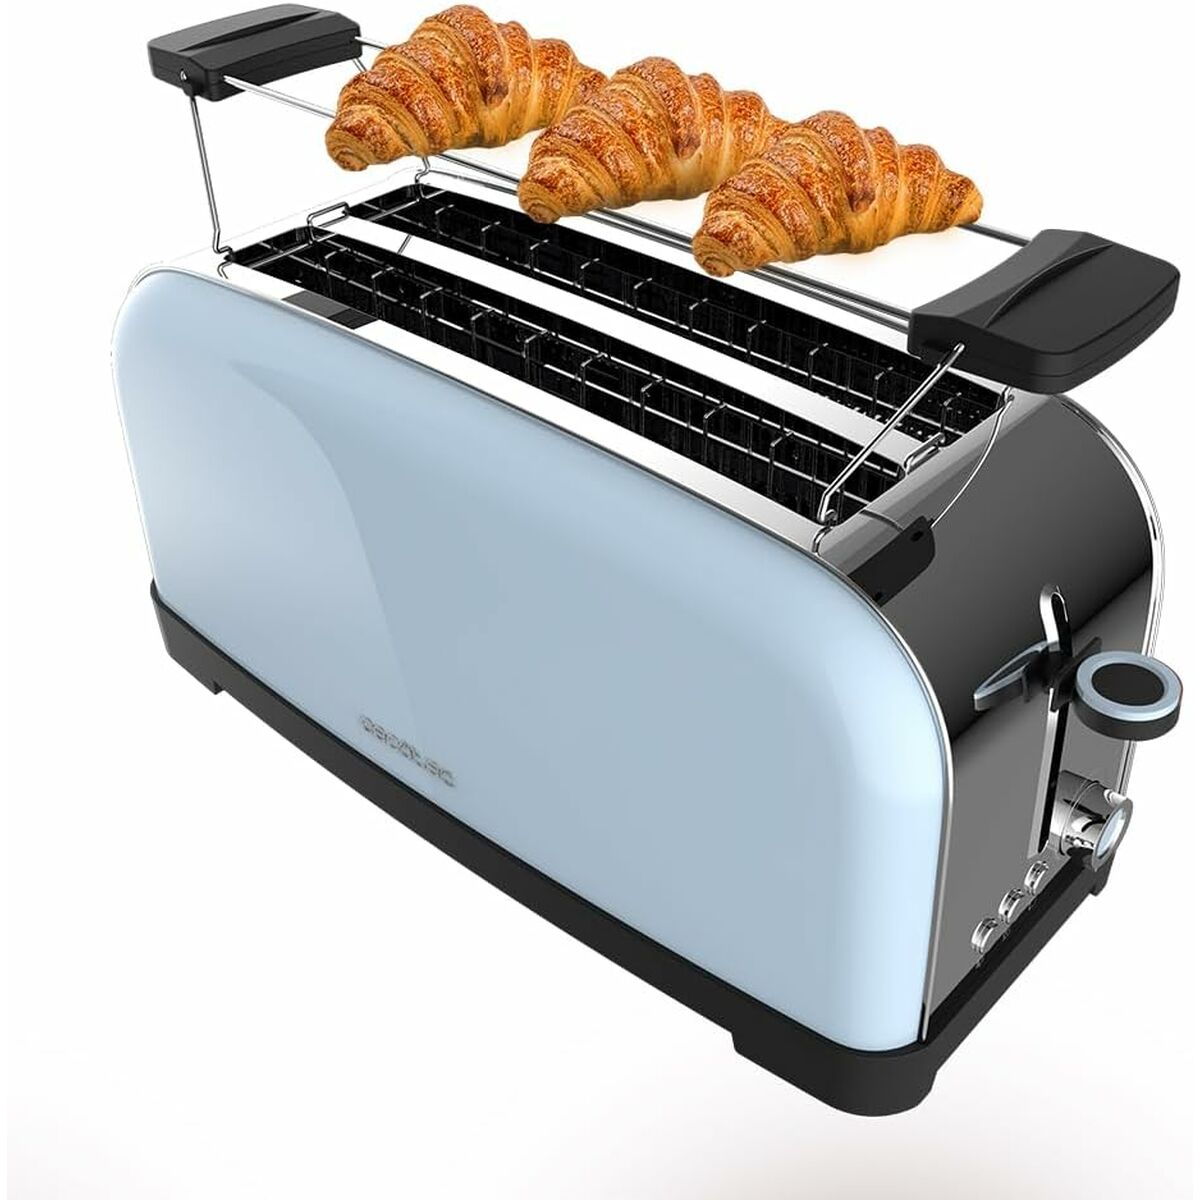 Broodrooster Cecotec Toastin' time 1500 1500 W